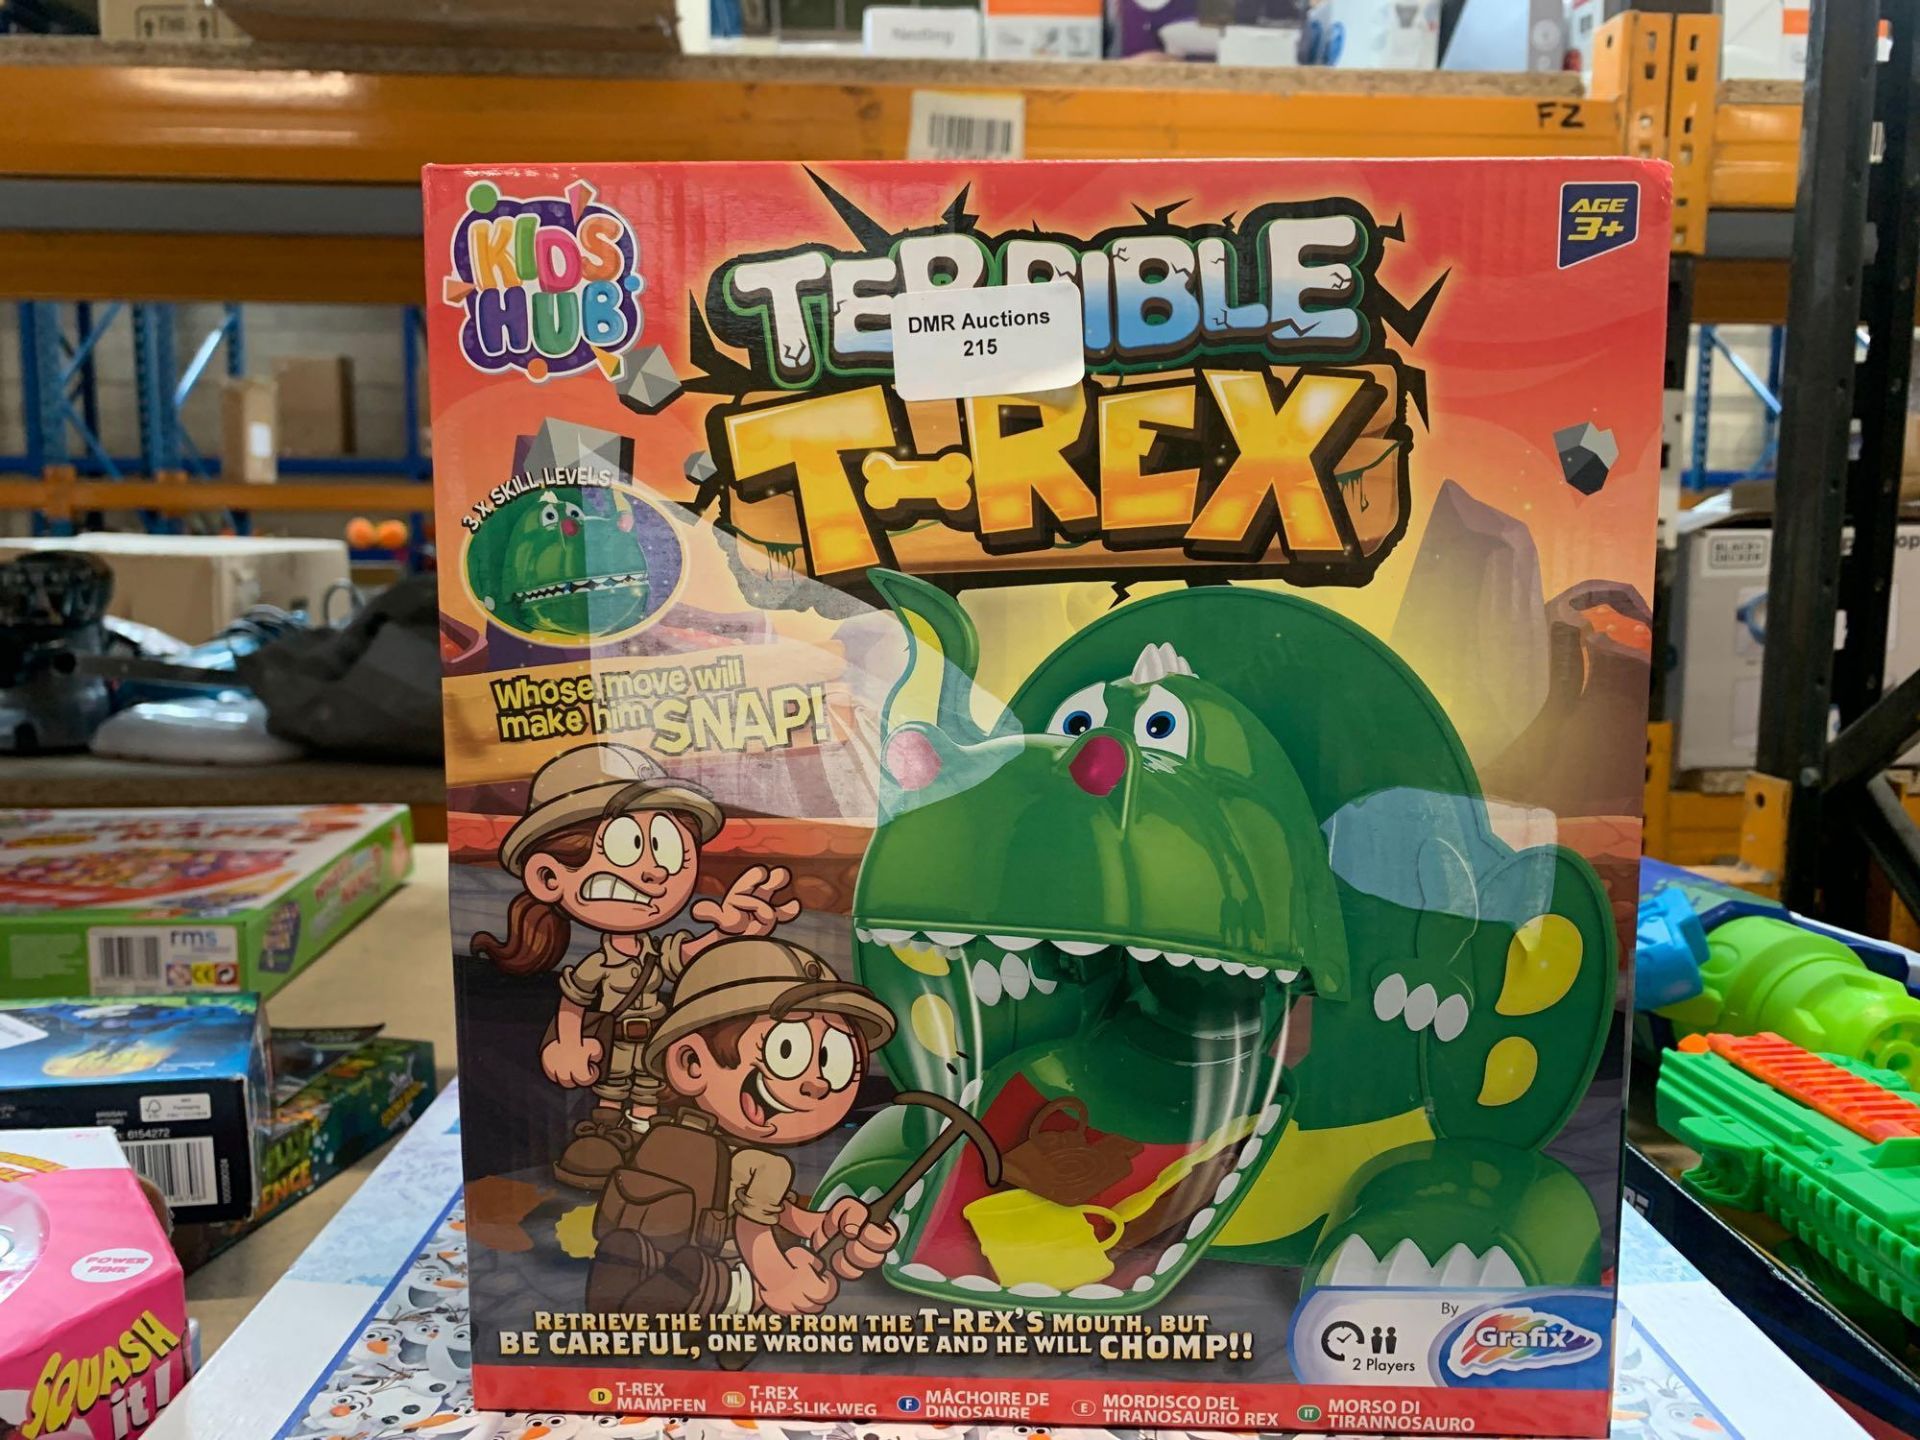 1 LOT TO CONTAIN 1 TERRIBLE T REX KIDS GAME (THIS ITEM IS AN UNTESTED CUSTOMER RETURN. PUBLIC